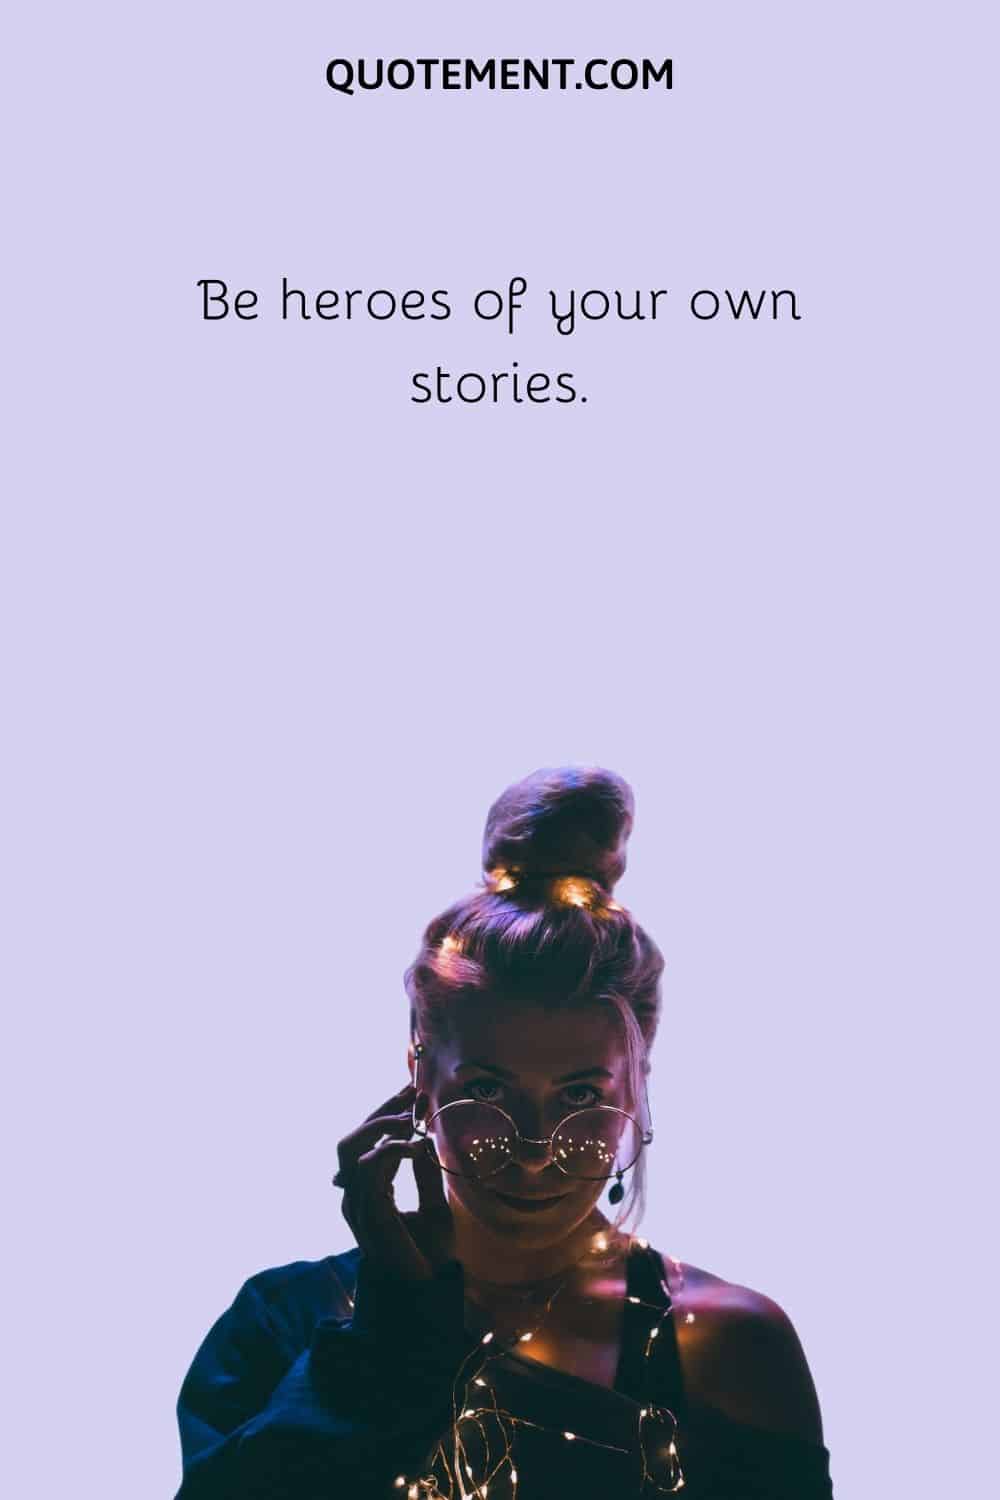 Be heroes of your own stories